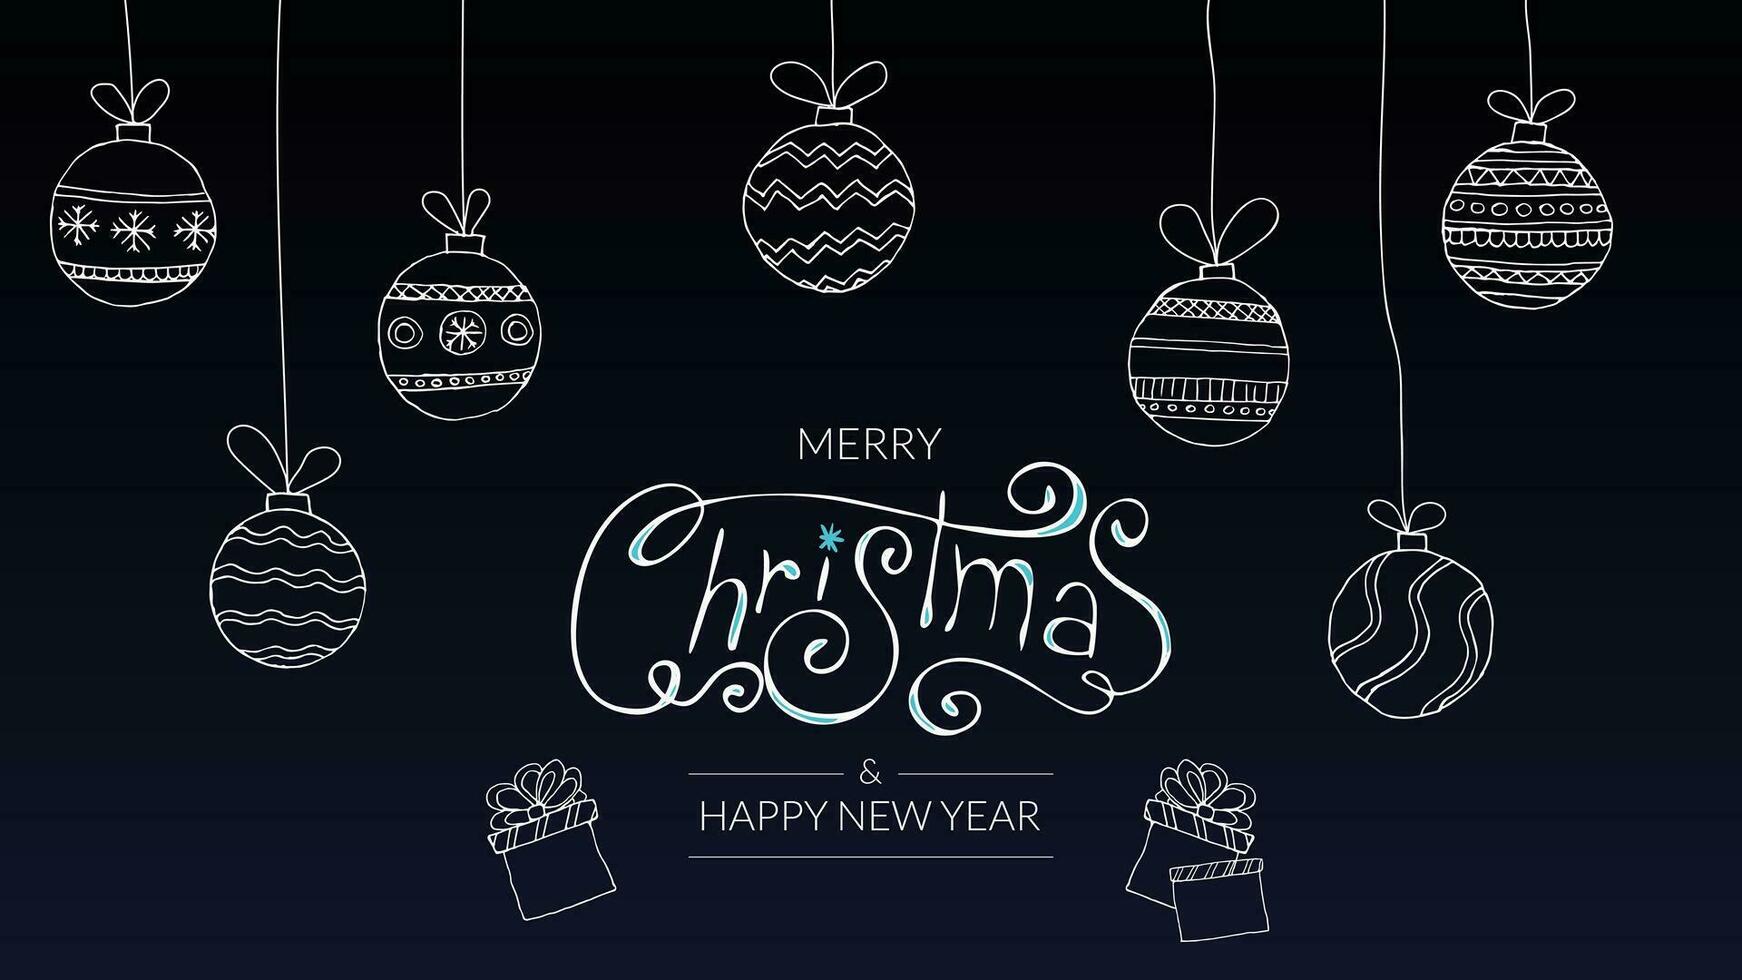 Merry Christmas banner or card. Happy new year Template with white christmas balls and hand-drawn inscription on classic blue background. vector